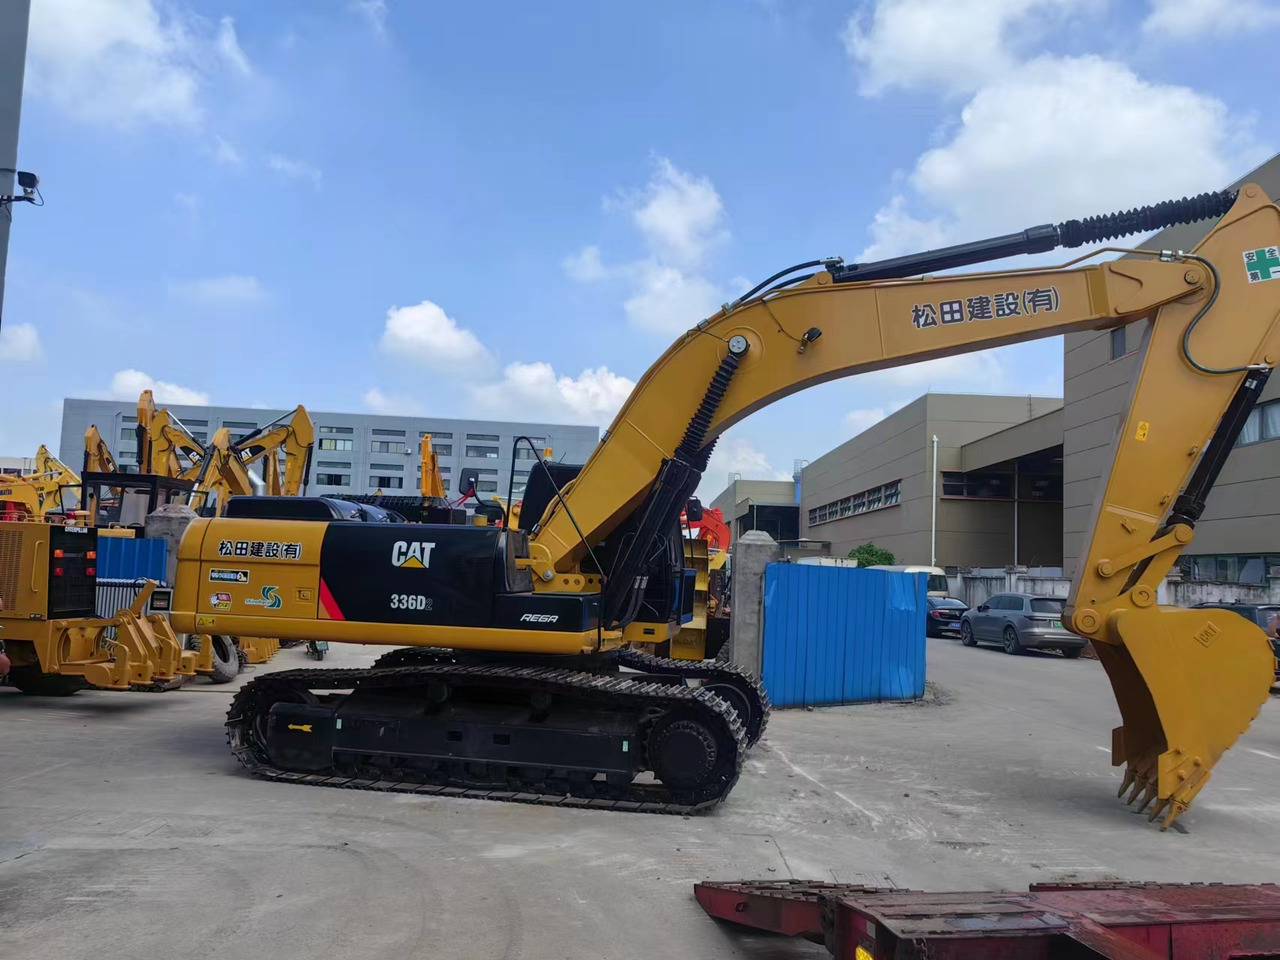 Crawler excavator 95%new Original Japan made CATERPILLAR Cat 336D2, Large engineering construction machinery good condition in stock hot selling !!!: picture 10